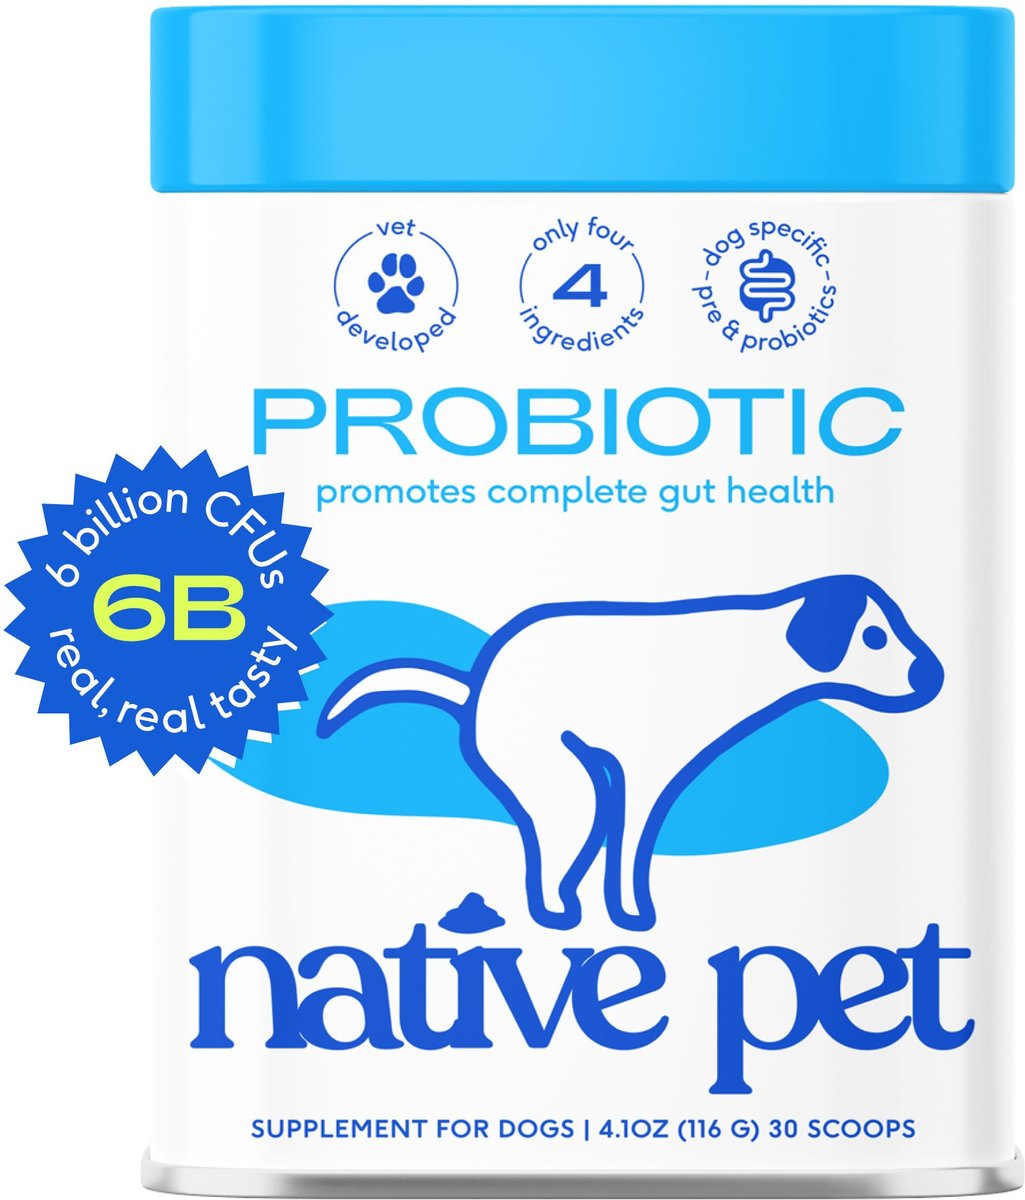  Natural Antibiotics for Dogs(2.02 Oz), Supports Dog